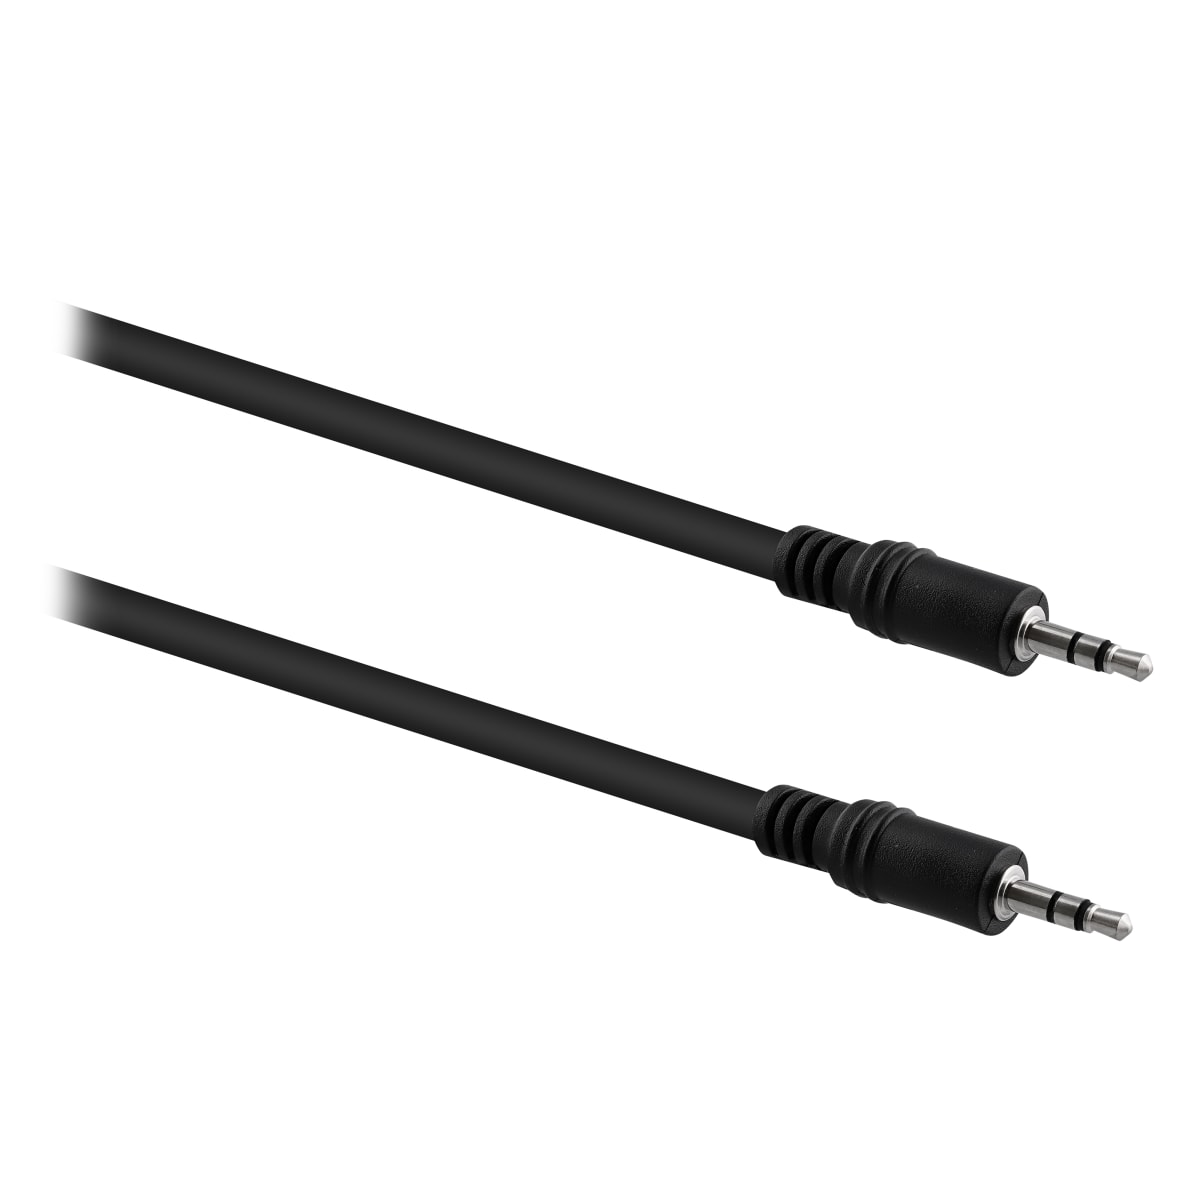 Jack 3.5mm male / jack 3.5mm male cable 80cm